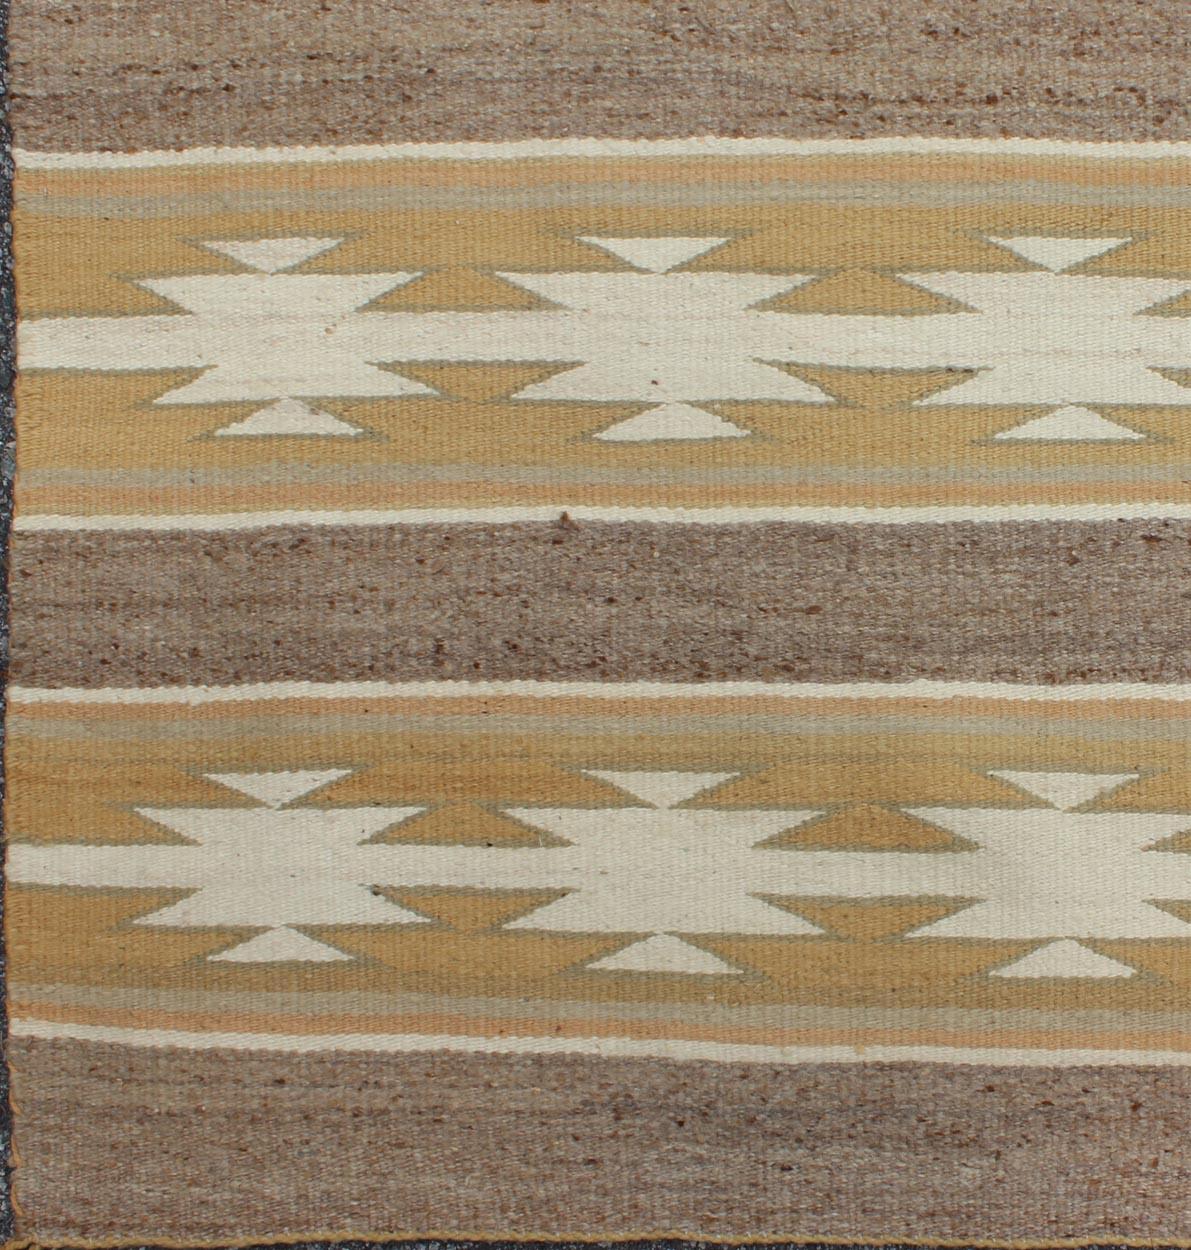 This intriguing antique Navajo Kilim, circa 1950 was woven in the United States during the mid-20th century. The exciting and unique composition boasts a captivating geometric composition with an all-over cross-shaped design. The range of colors